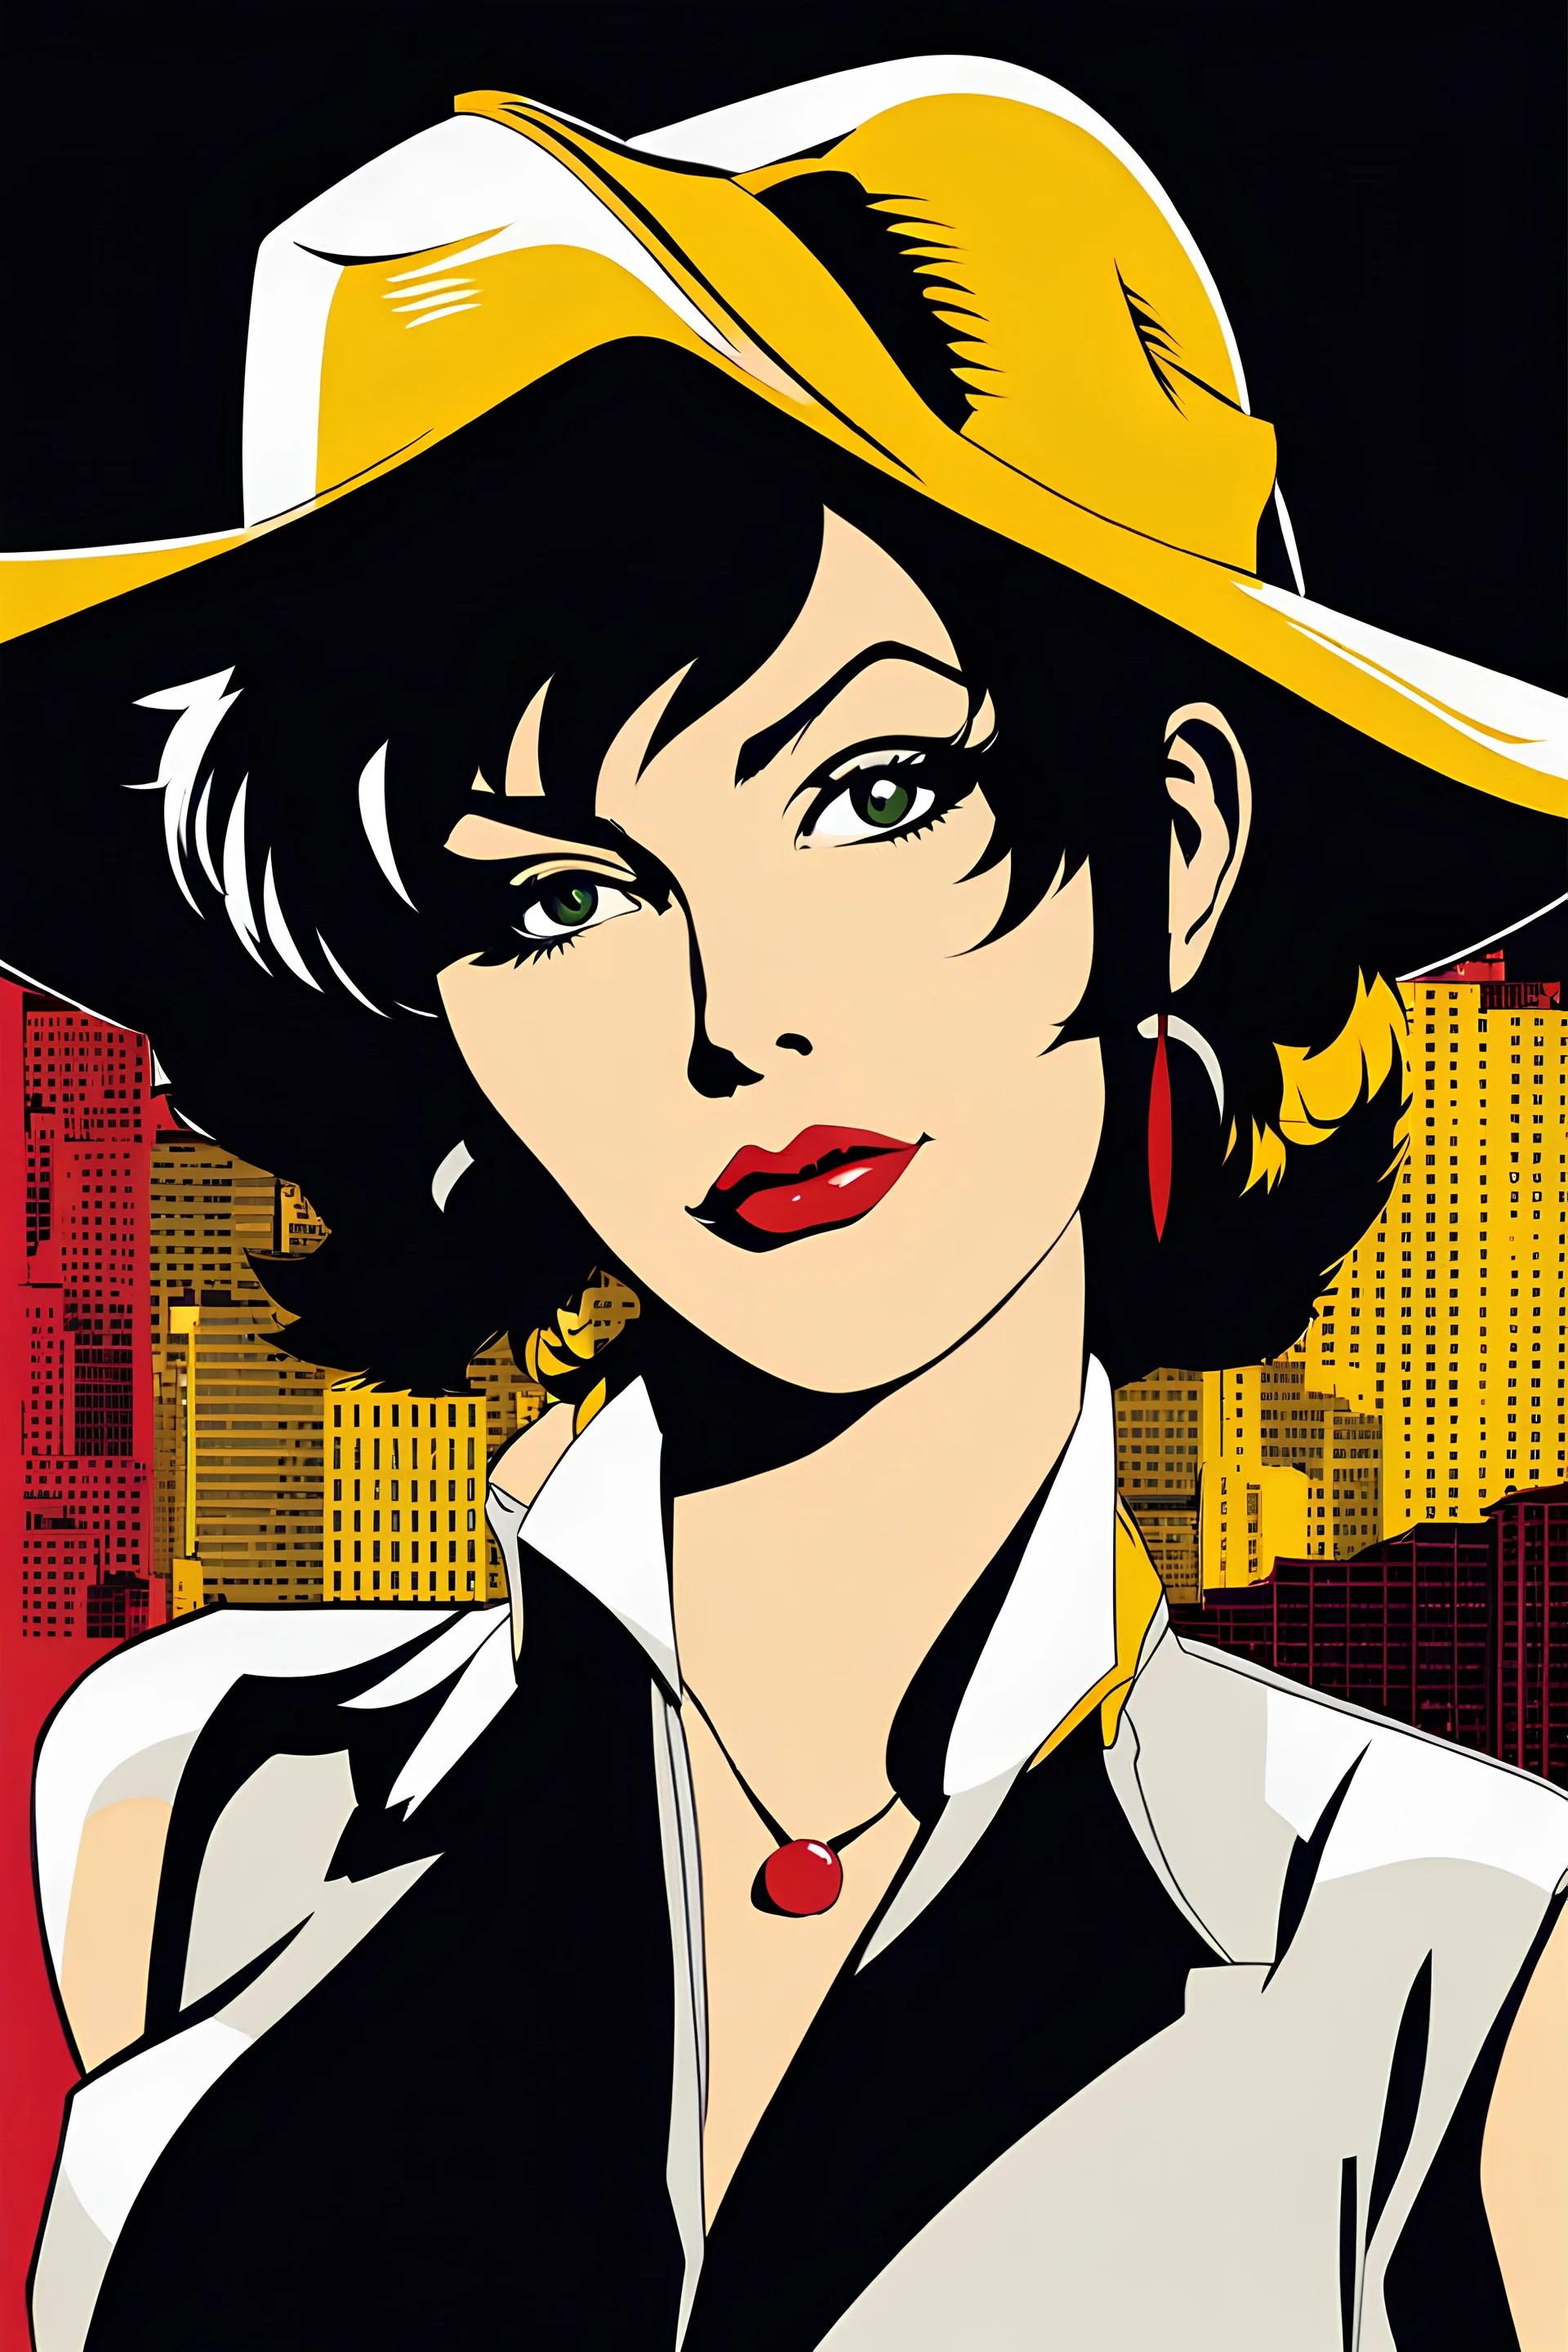 Faye Valentine From Cowboy Bebop, Andy Warhol Style Pop Art, and Very Detaled